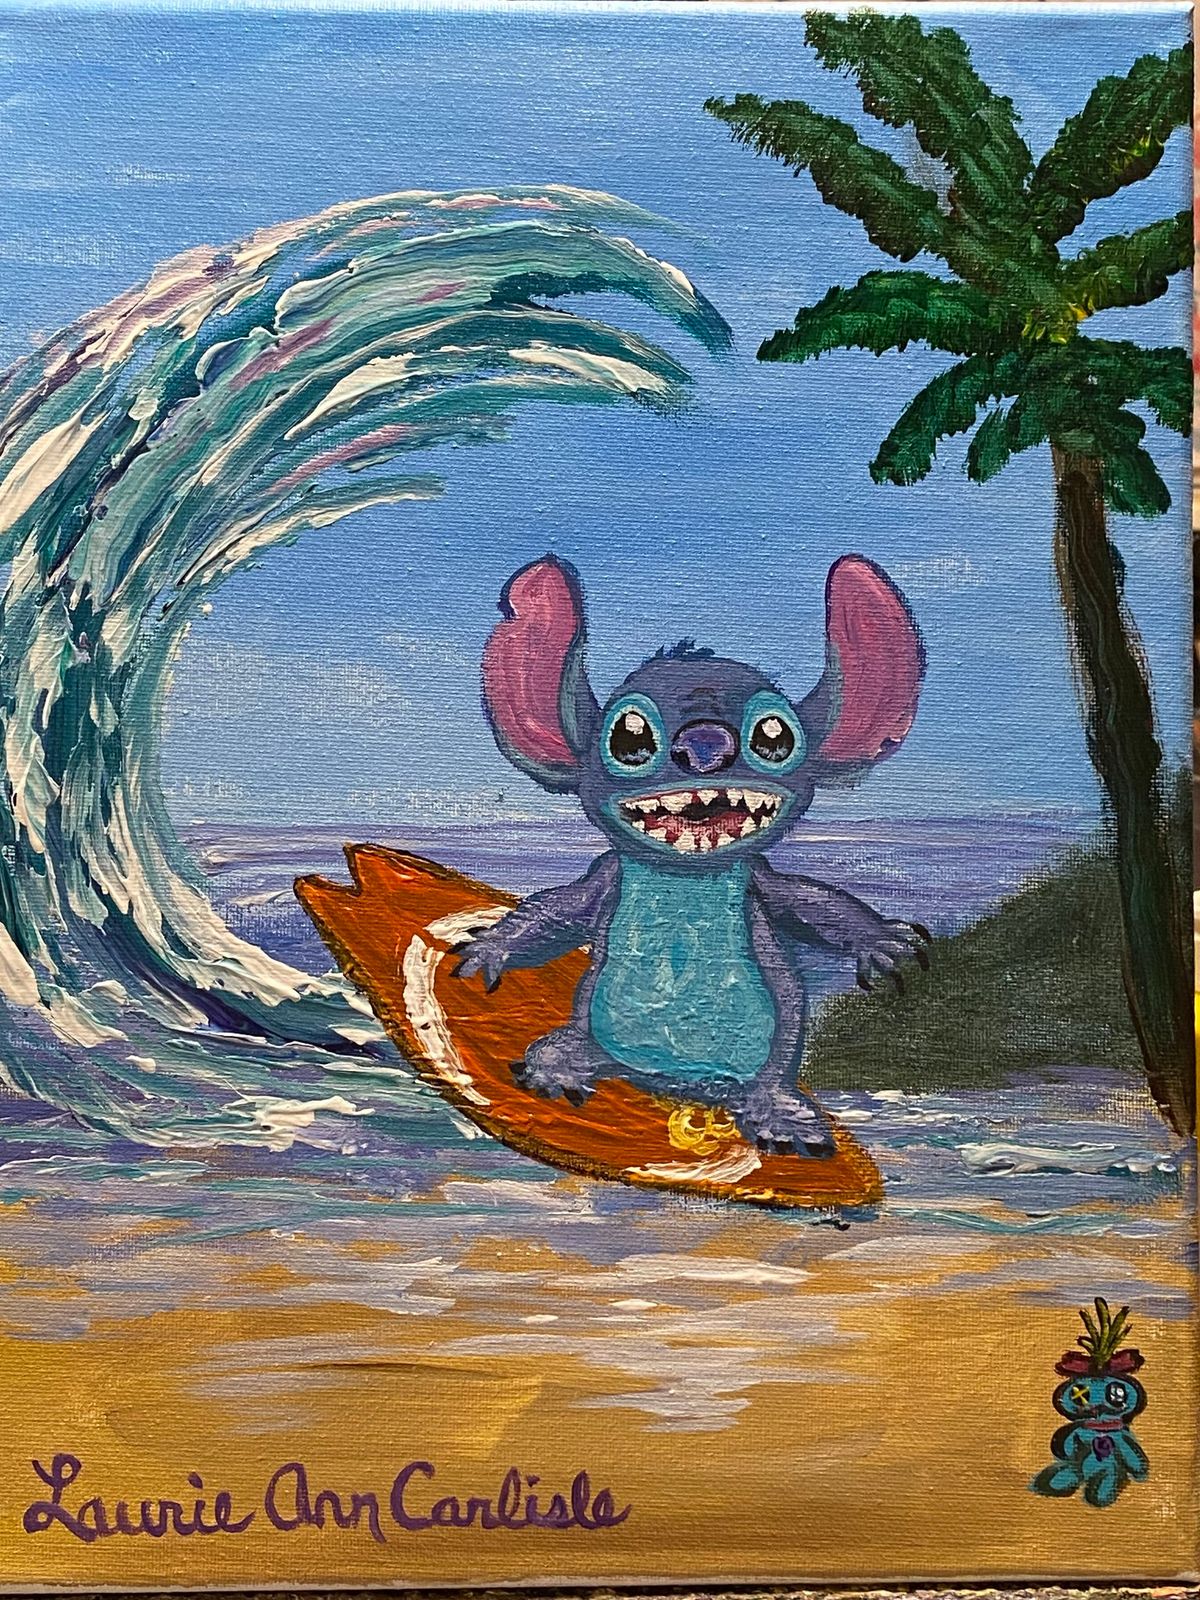 Stitch Surfing Paint Party by Laurie Ann July 6 from 1:30-4:30 Julie & Sammy\u2019s $35 text 520-508-3713